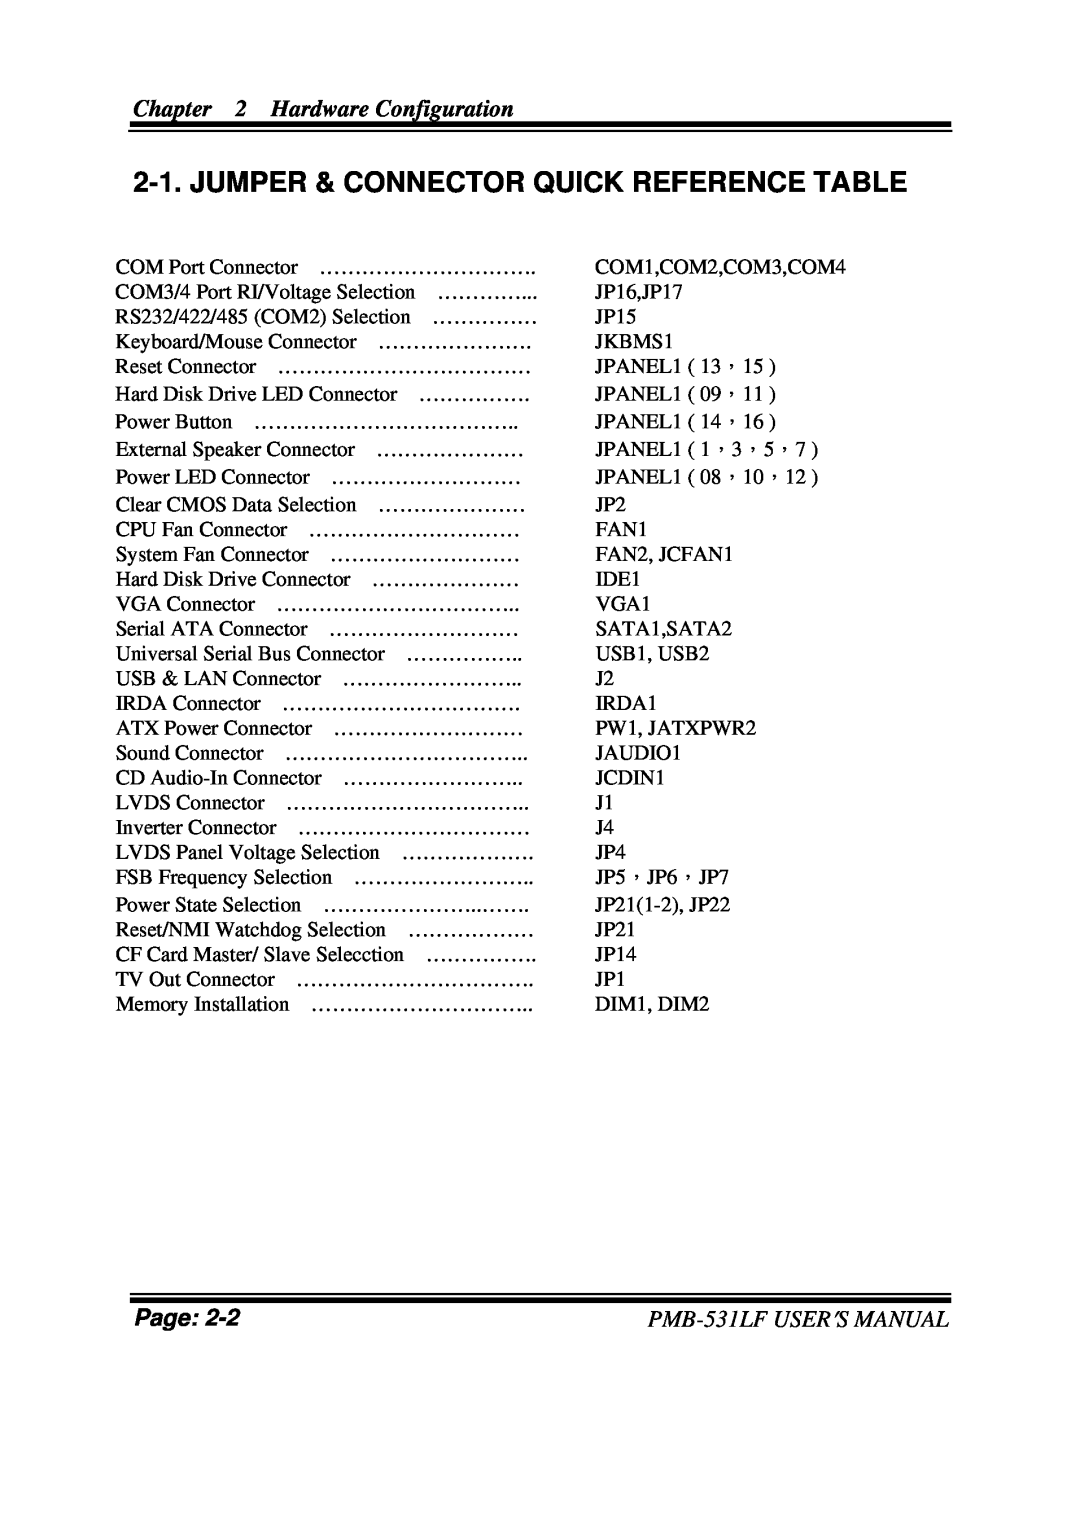 Intel user manual Jumper & Connector Quick Reference Table, Hardware Configuration, Page, PMB-531LFUSER′S MANUAL 